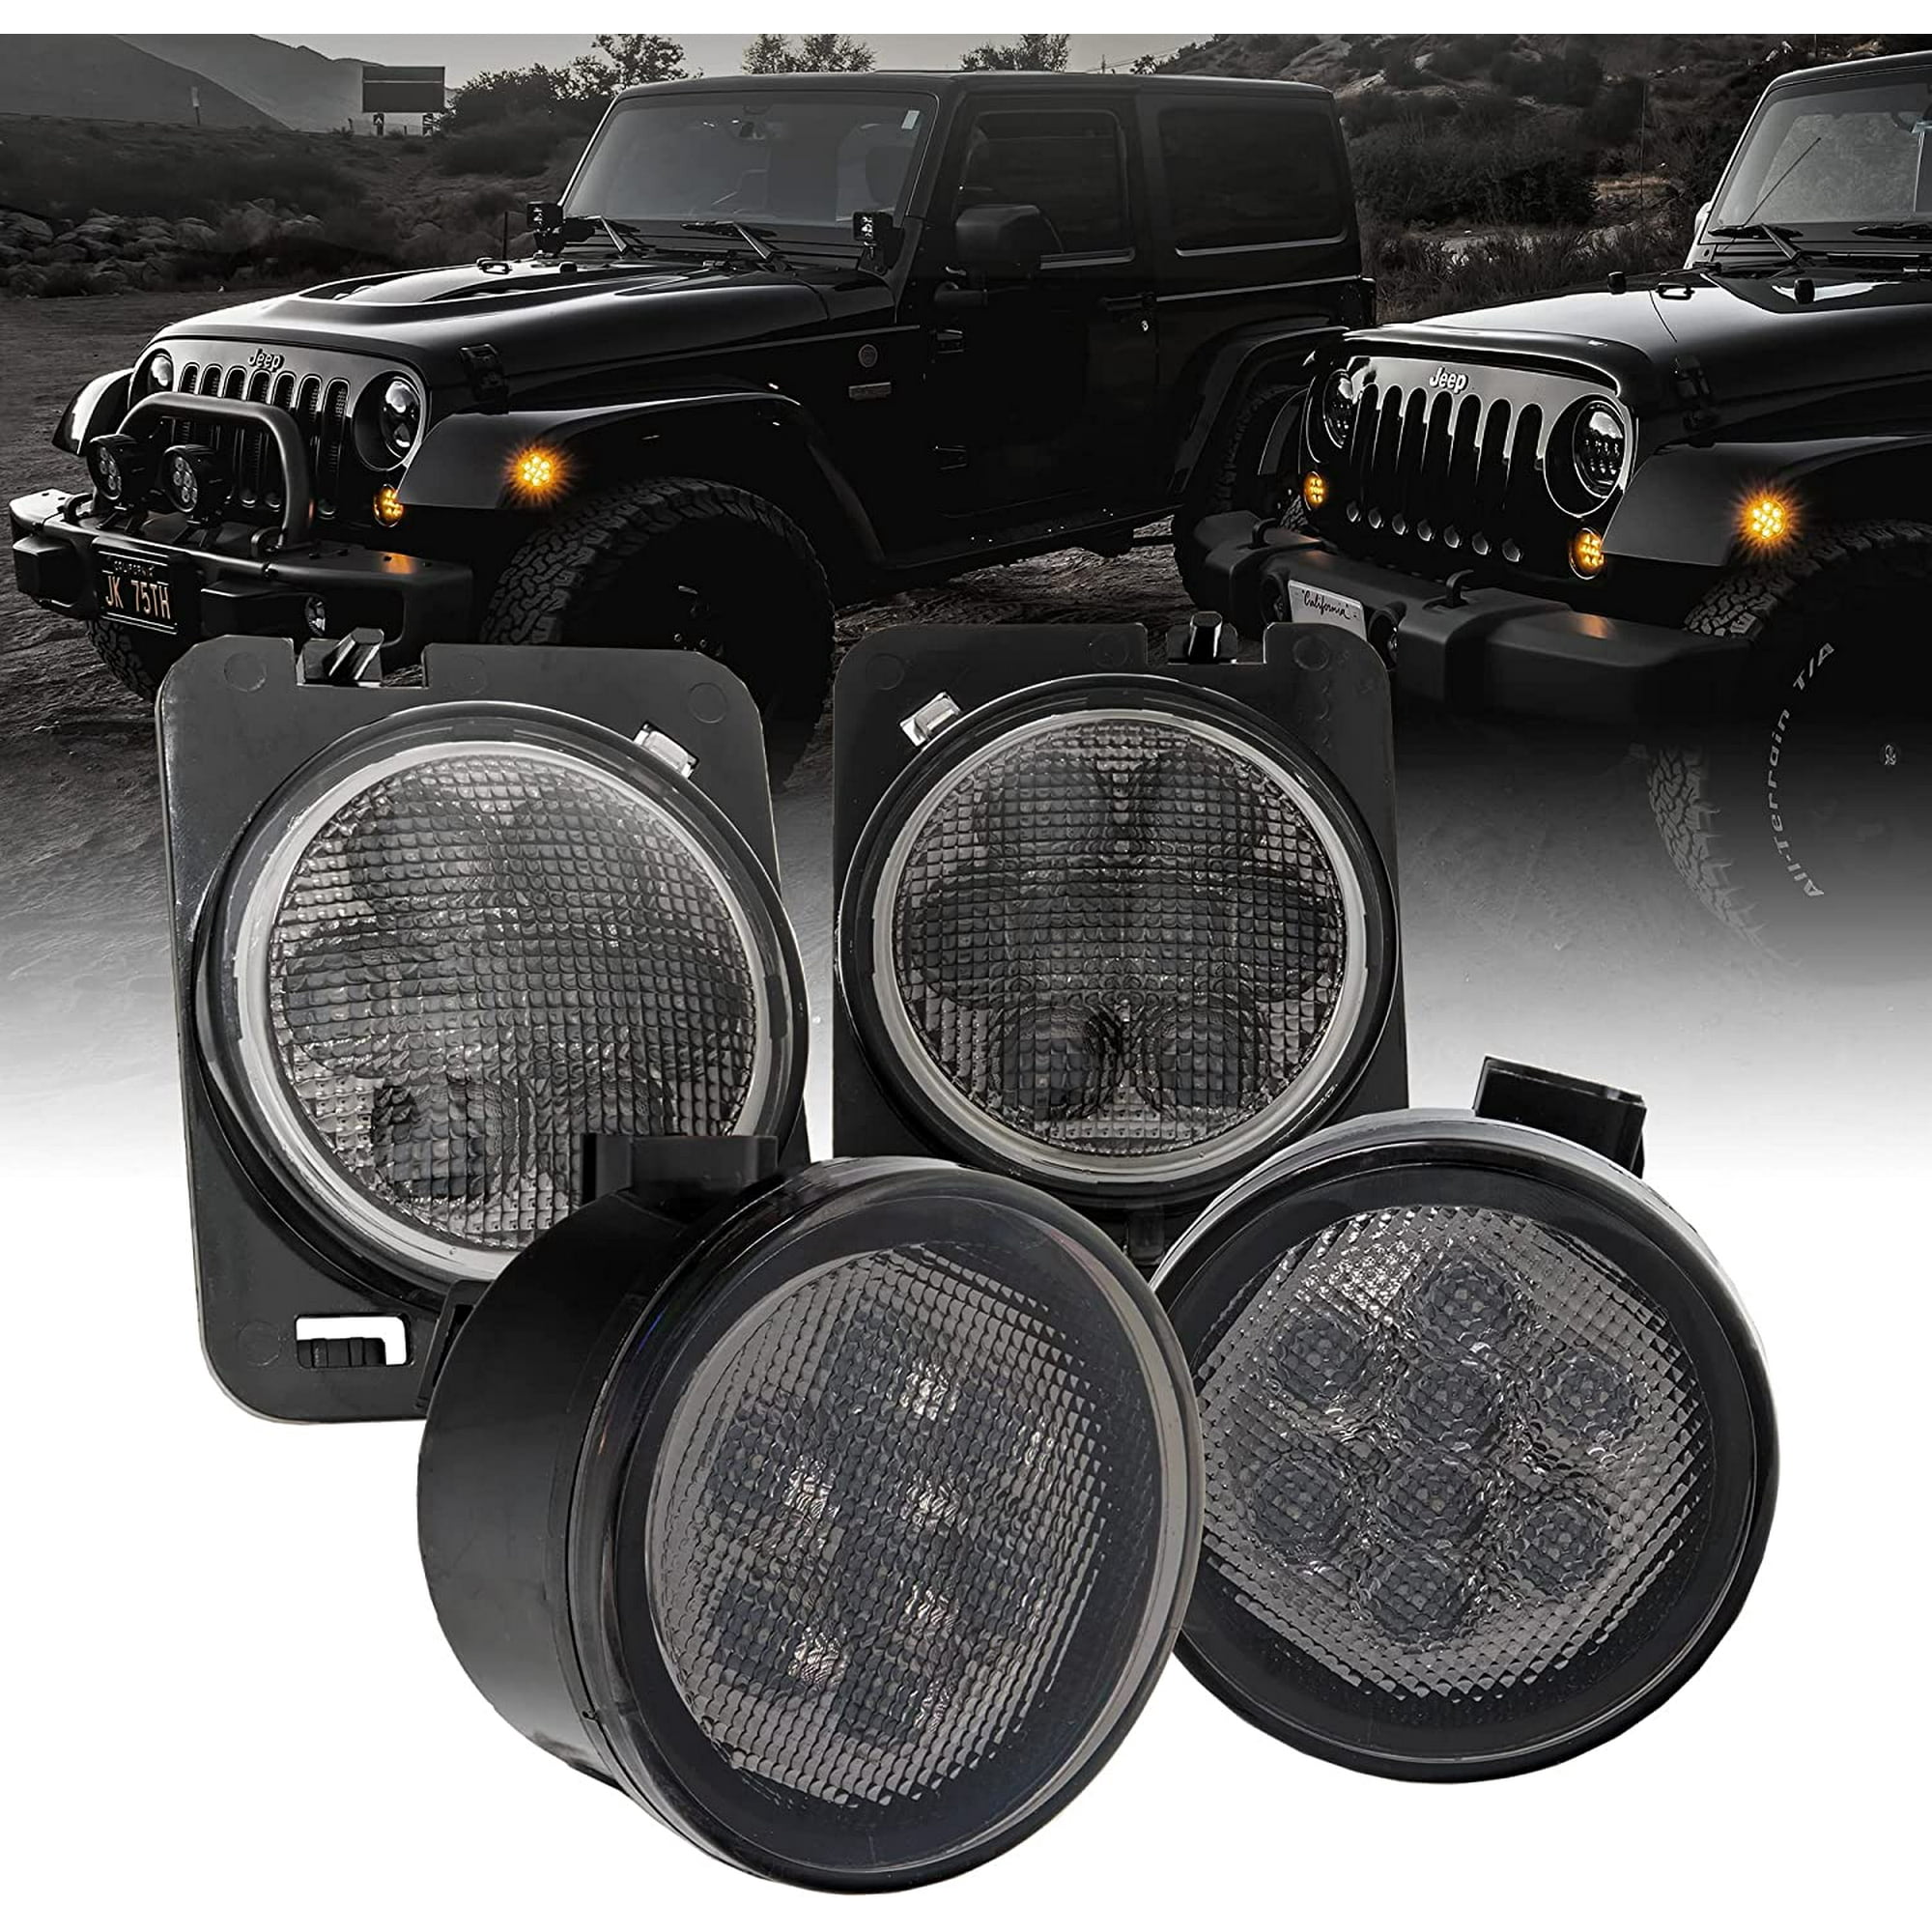 LED Turn Signal & Side Marker Light Replacement for Jeep Wrangler [Smoked  Lens] [Amber] LED Light Kit Compatible with Jeep Wrangler JK & Unlimited  2007-2018 Accessories | Walmart Canada